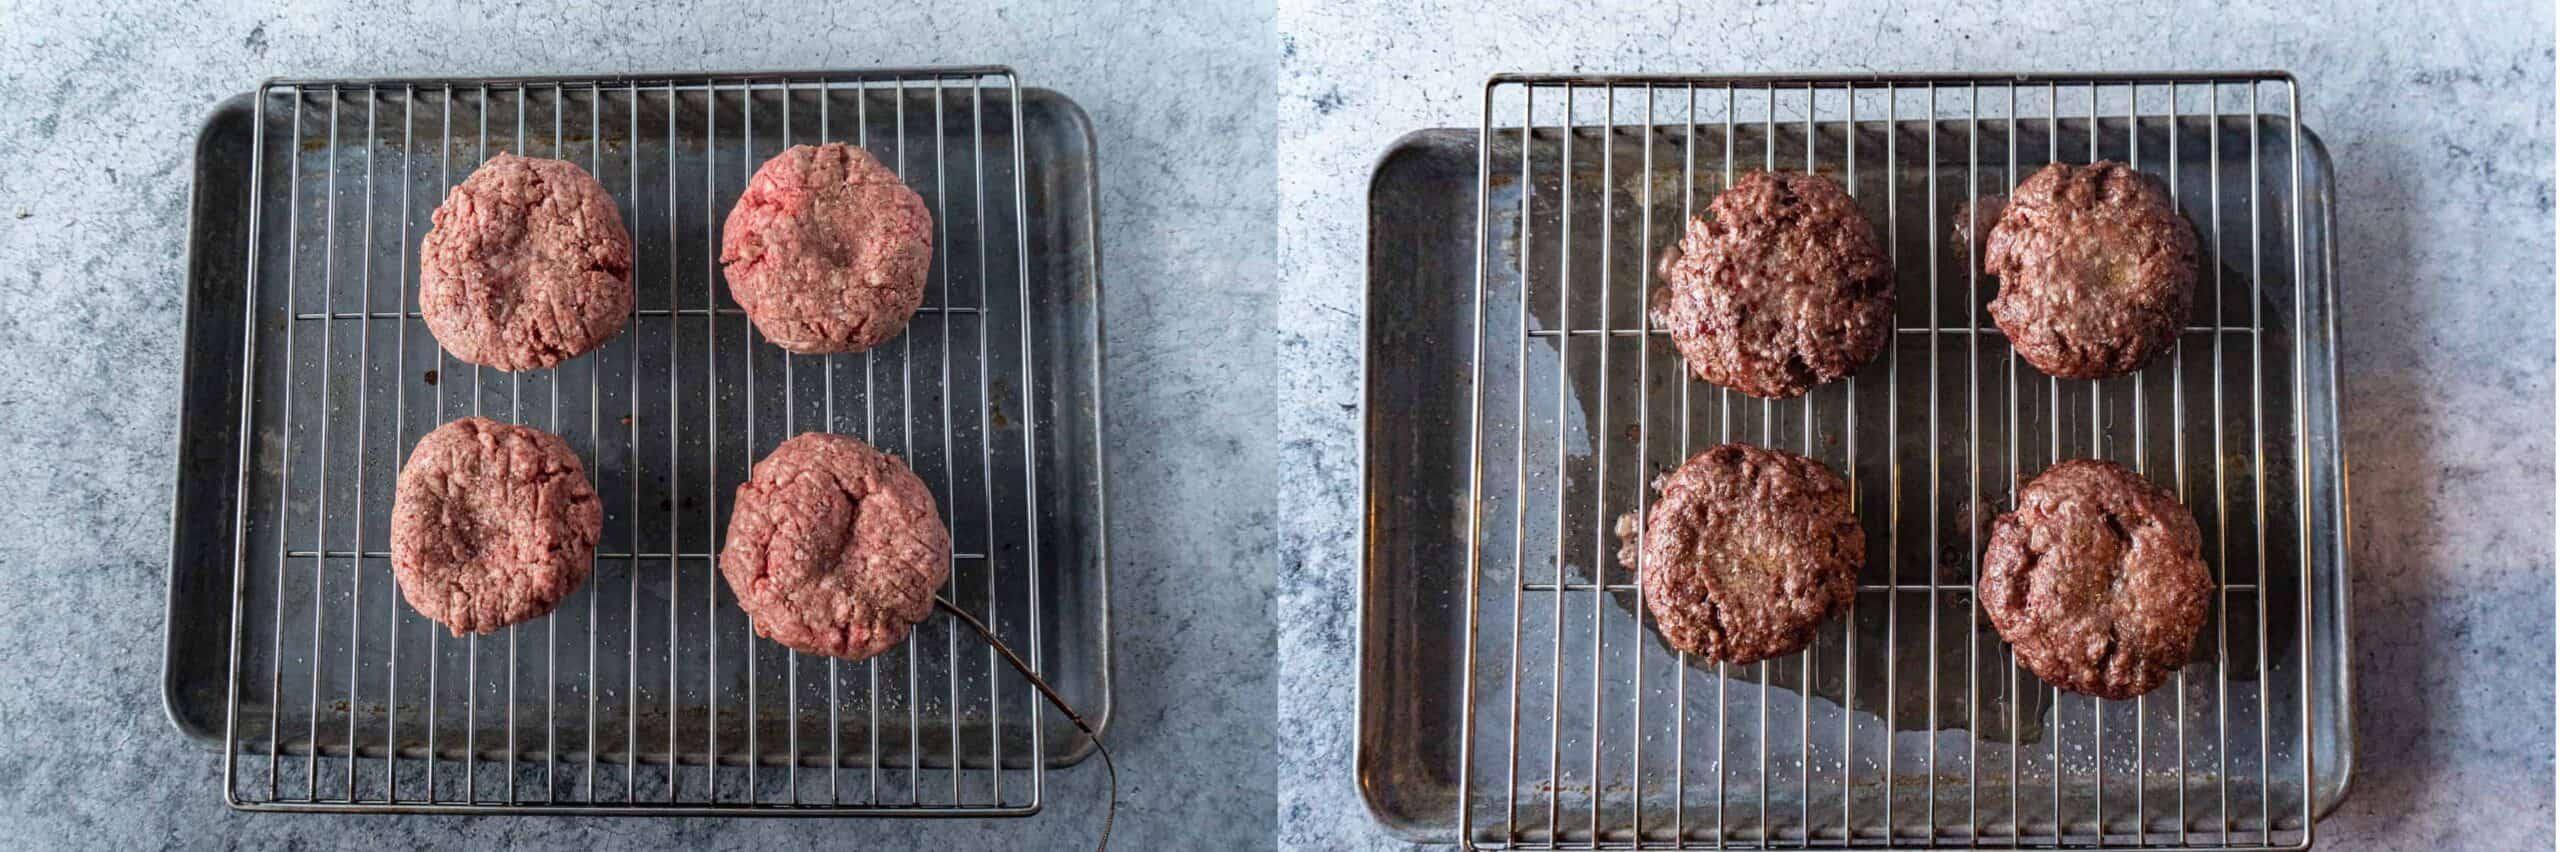 Burger Patties before and after baking